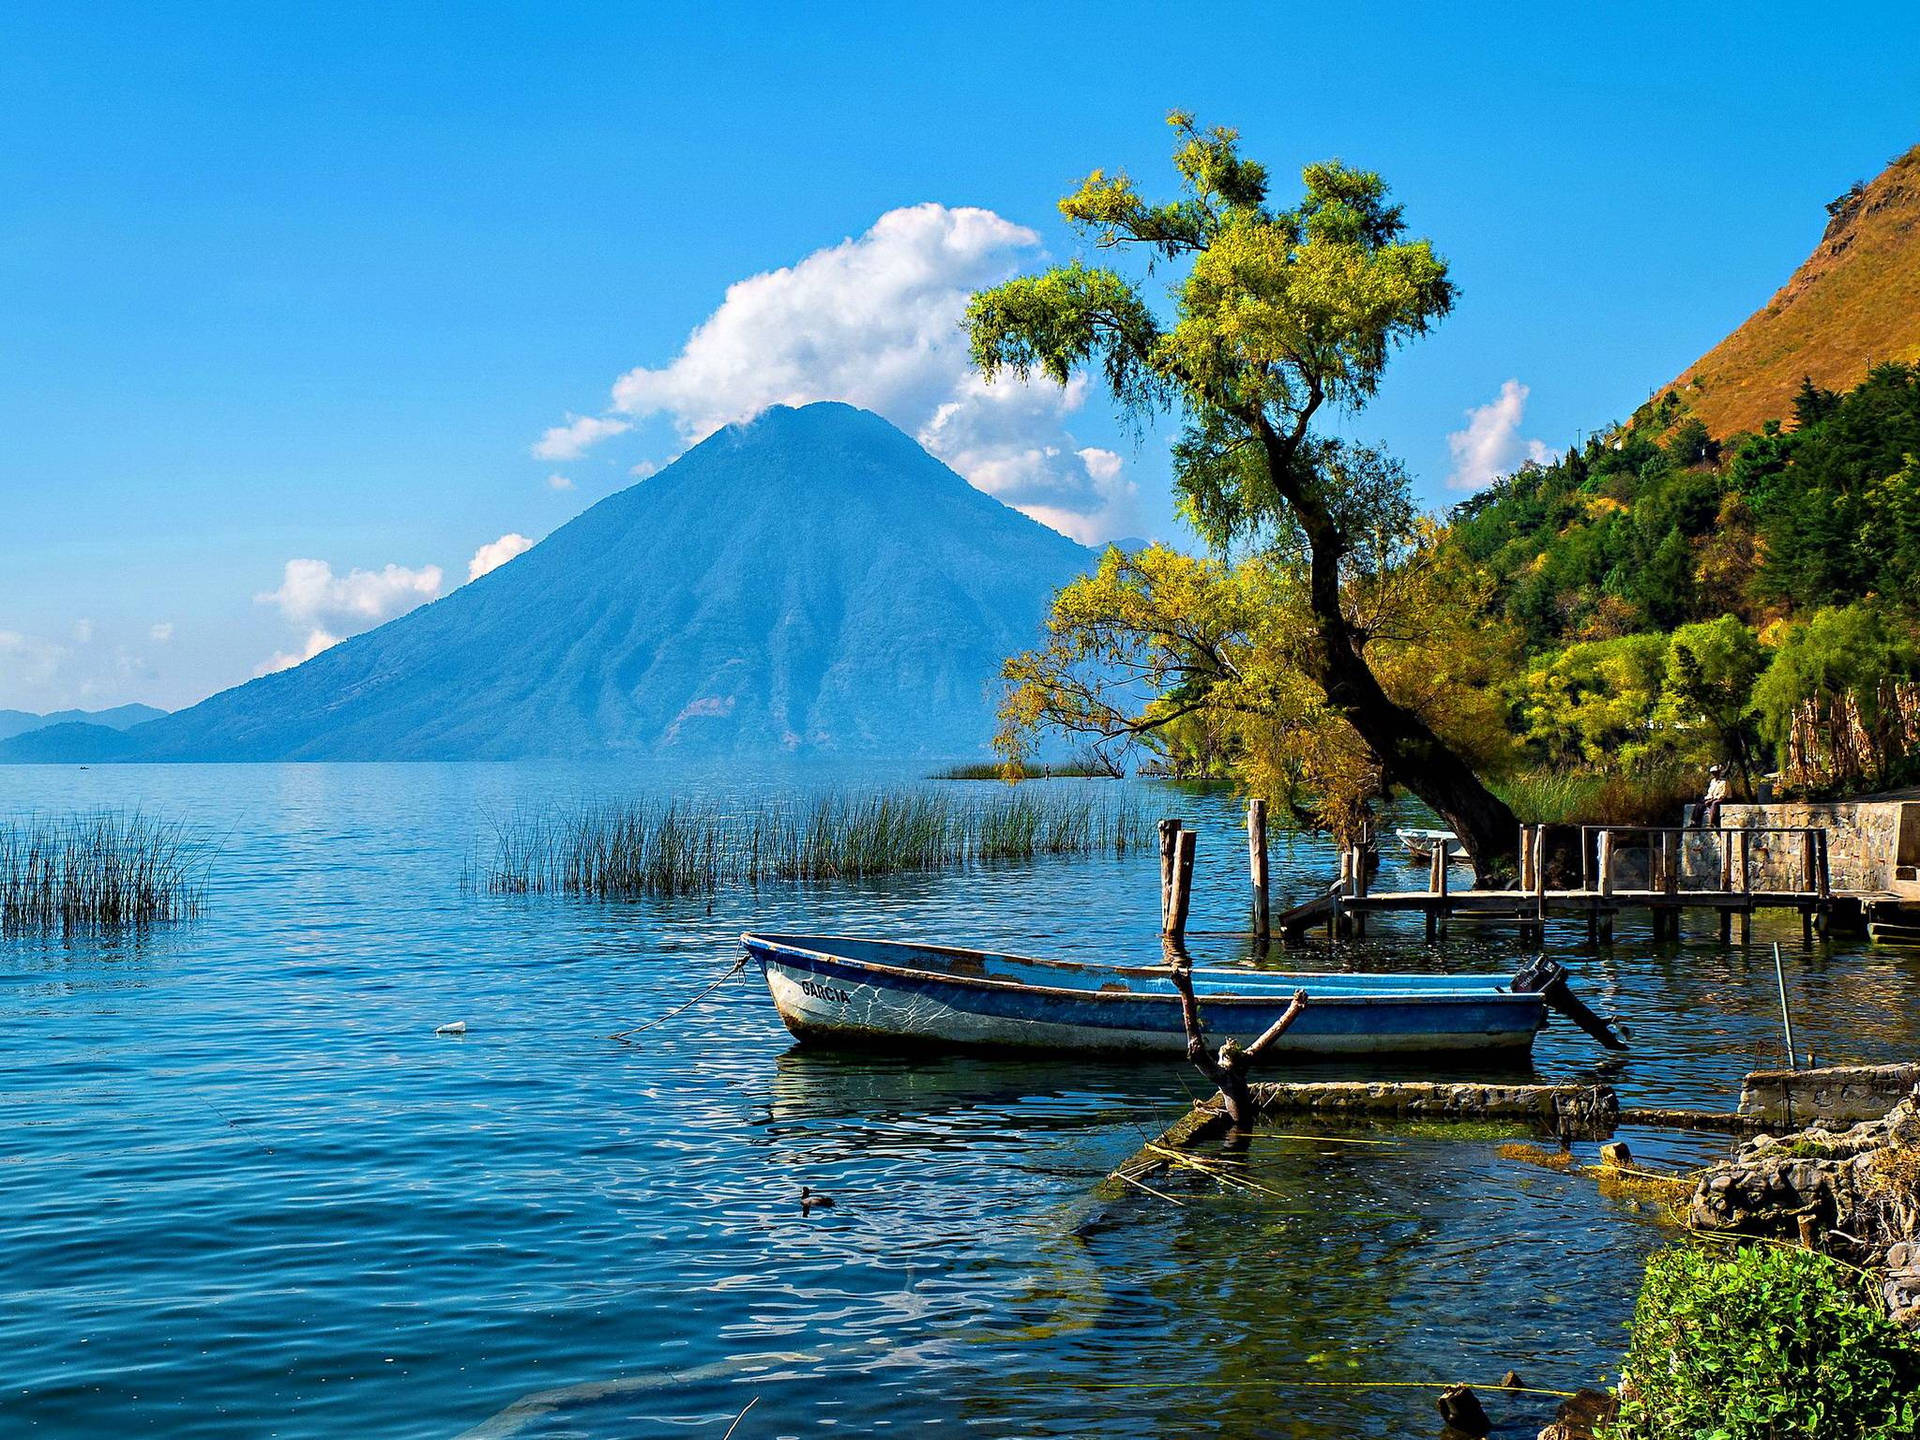 1K Guatemala Pictures  Download Free Images on Unsplash